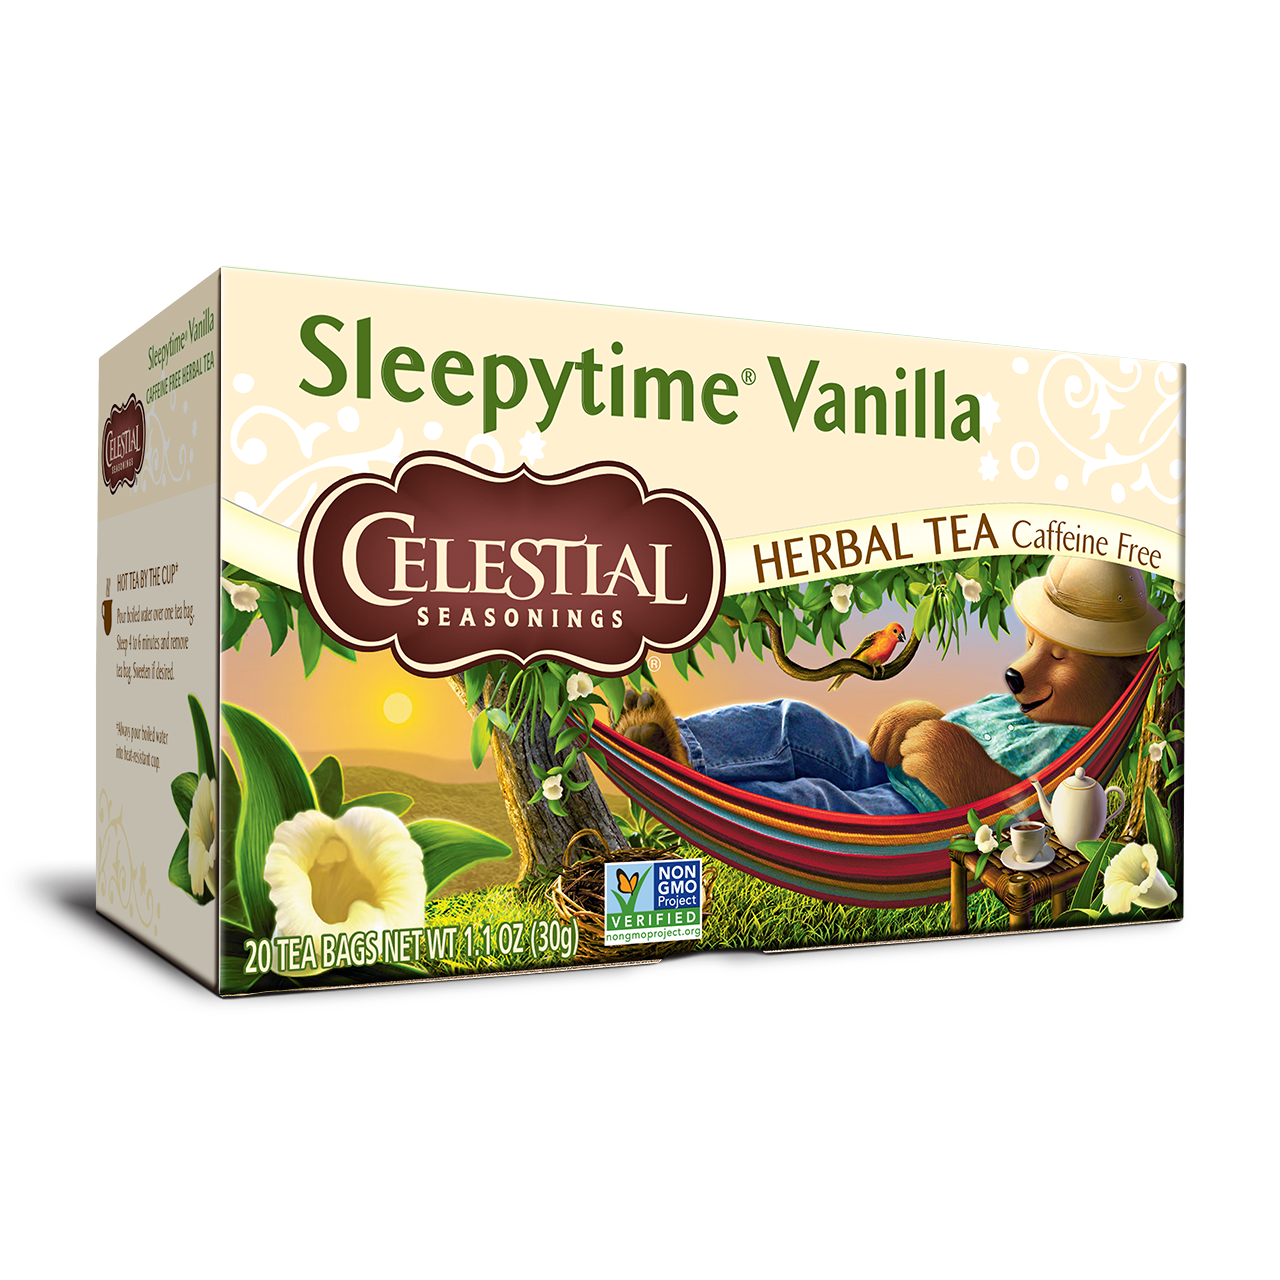 A Cup of Calm: Exploring the Ingredients in Sleepytime Tea